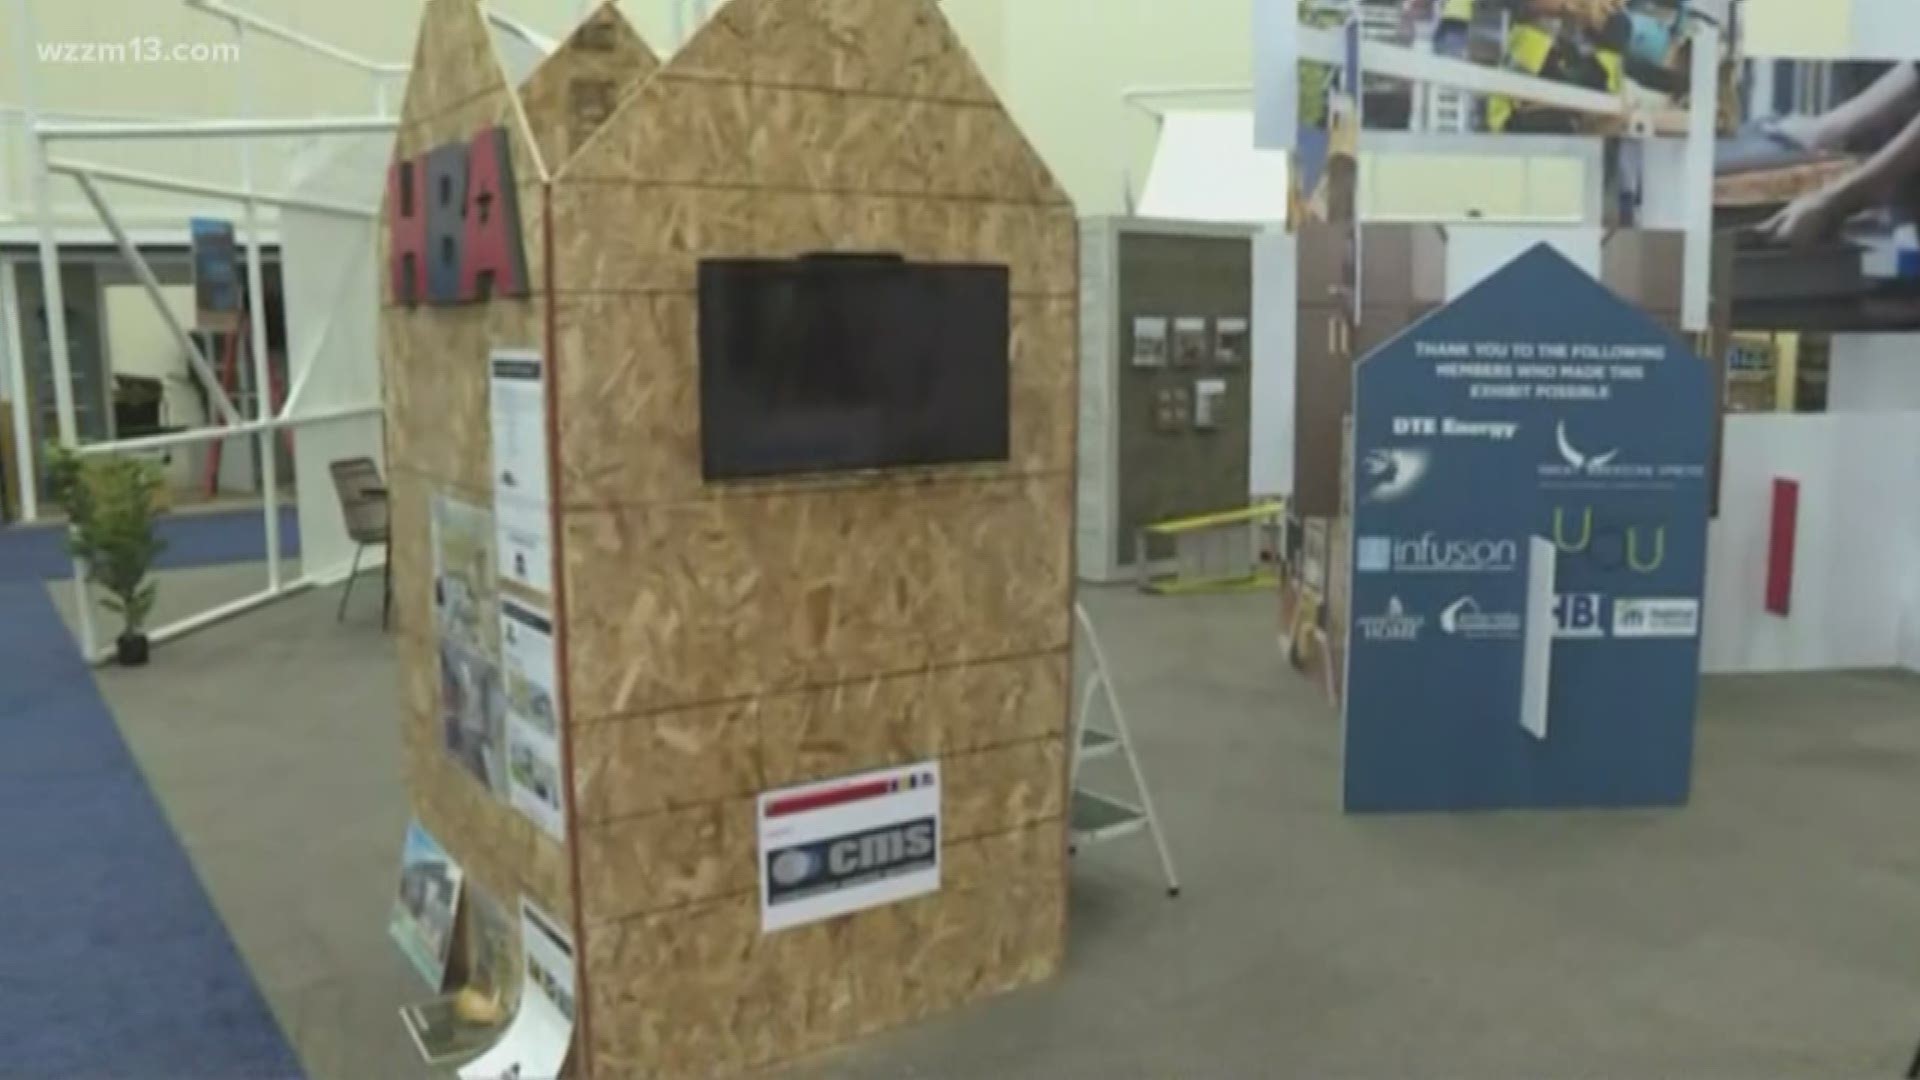 The Grand Rapids Remodeling and New Homes Show gets underway Friday at DeVos Place. The annual event will feature the latest trends in design and technology for your home.